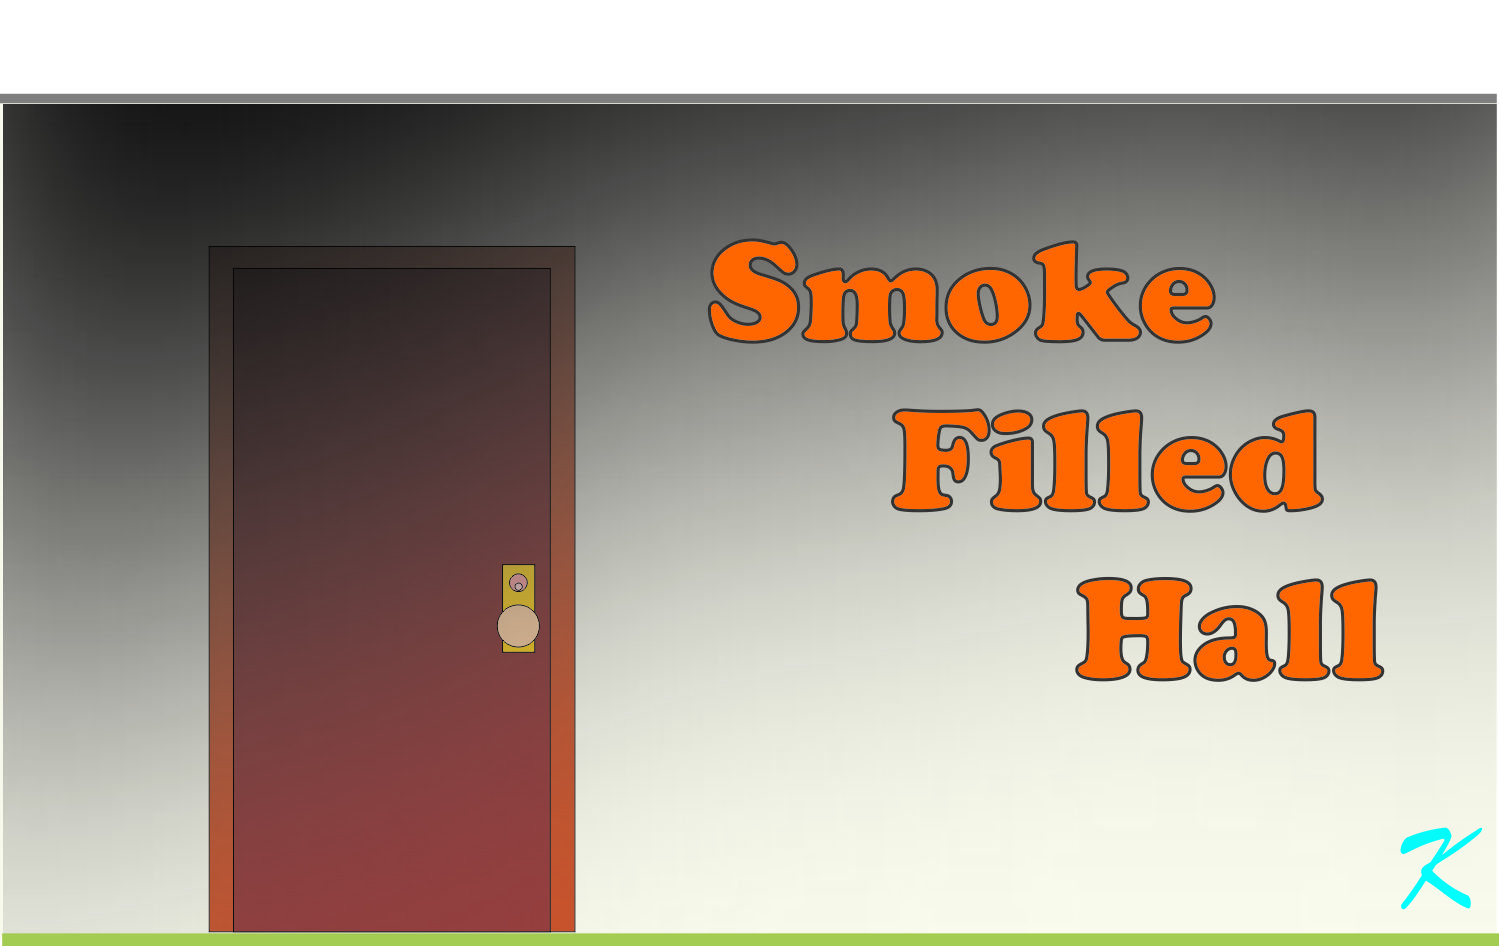 When the alarms are sounding, slowly check the hallways for smoke before using the hallways for escape